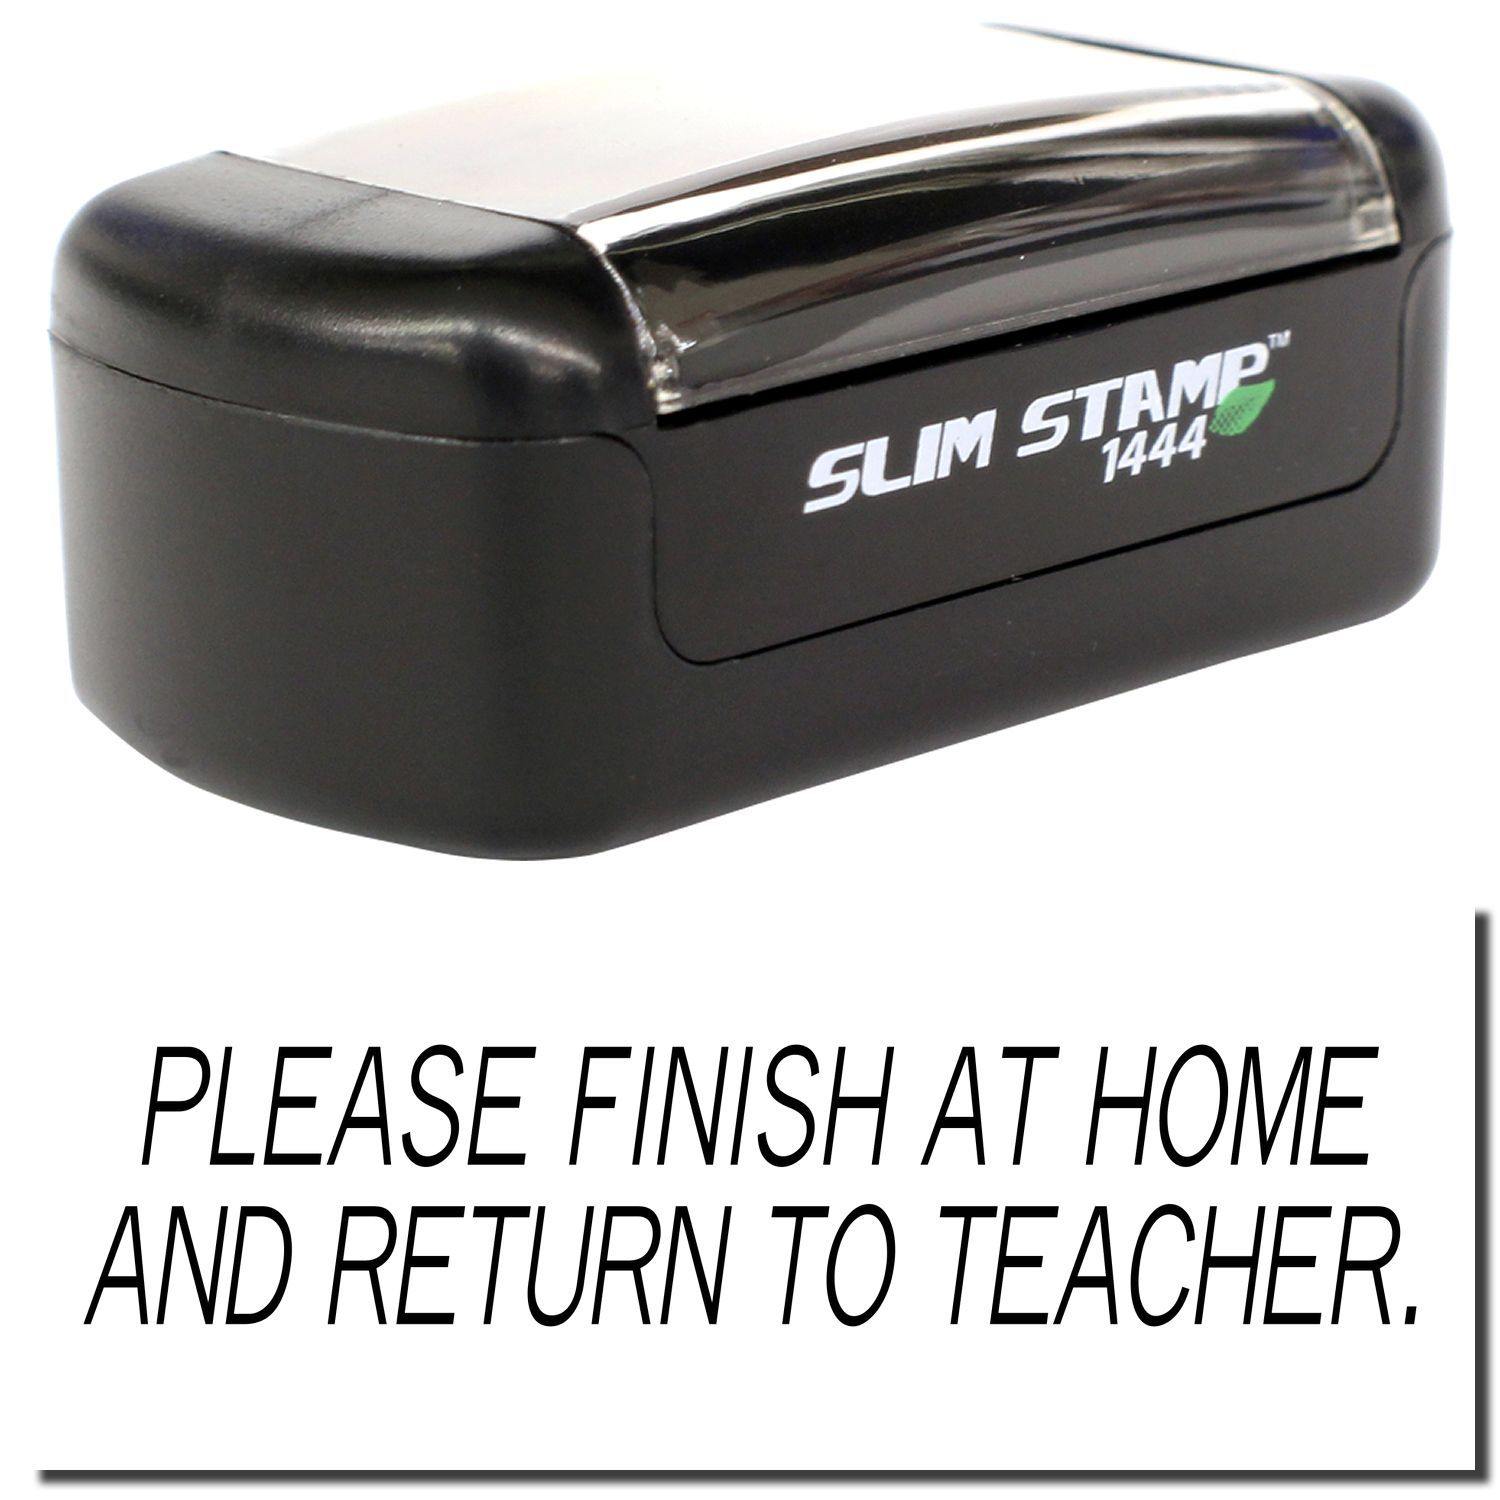 A stock office pre-inked stamp with a stamped image showing how the text "PLEASE FINISH AT HOME AND RETURN TO TEACHER." is displayed after stamping.